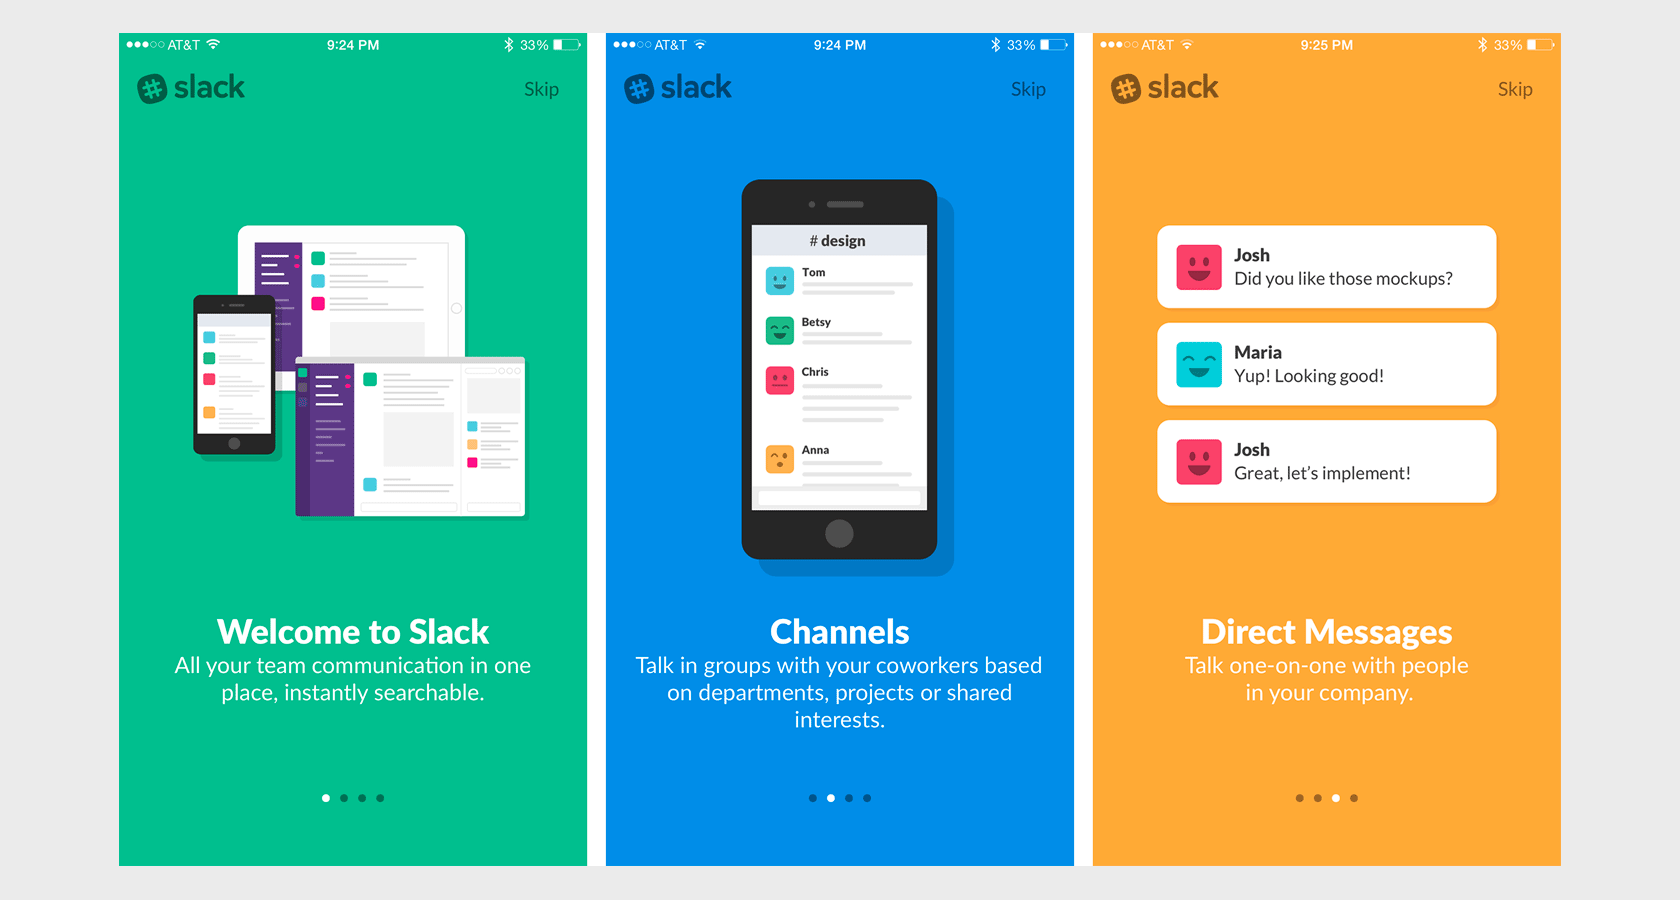 Slack uses introductory UX onboarding best practices